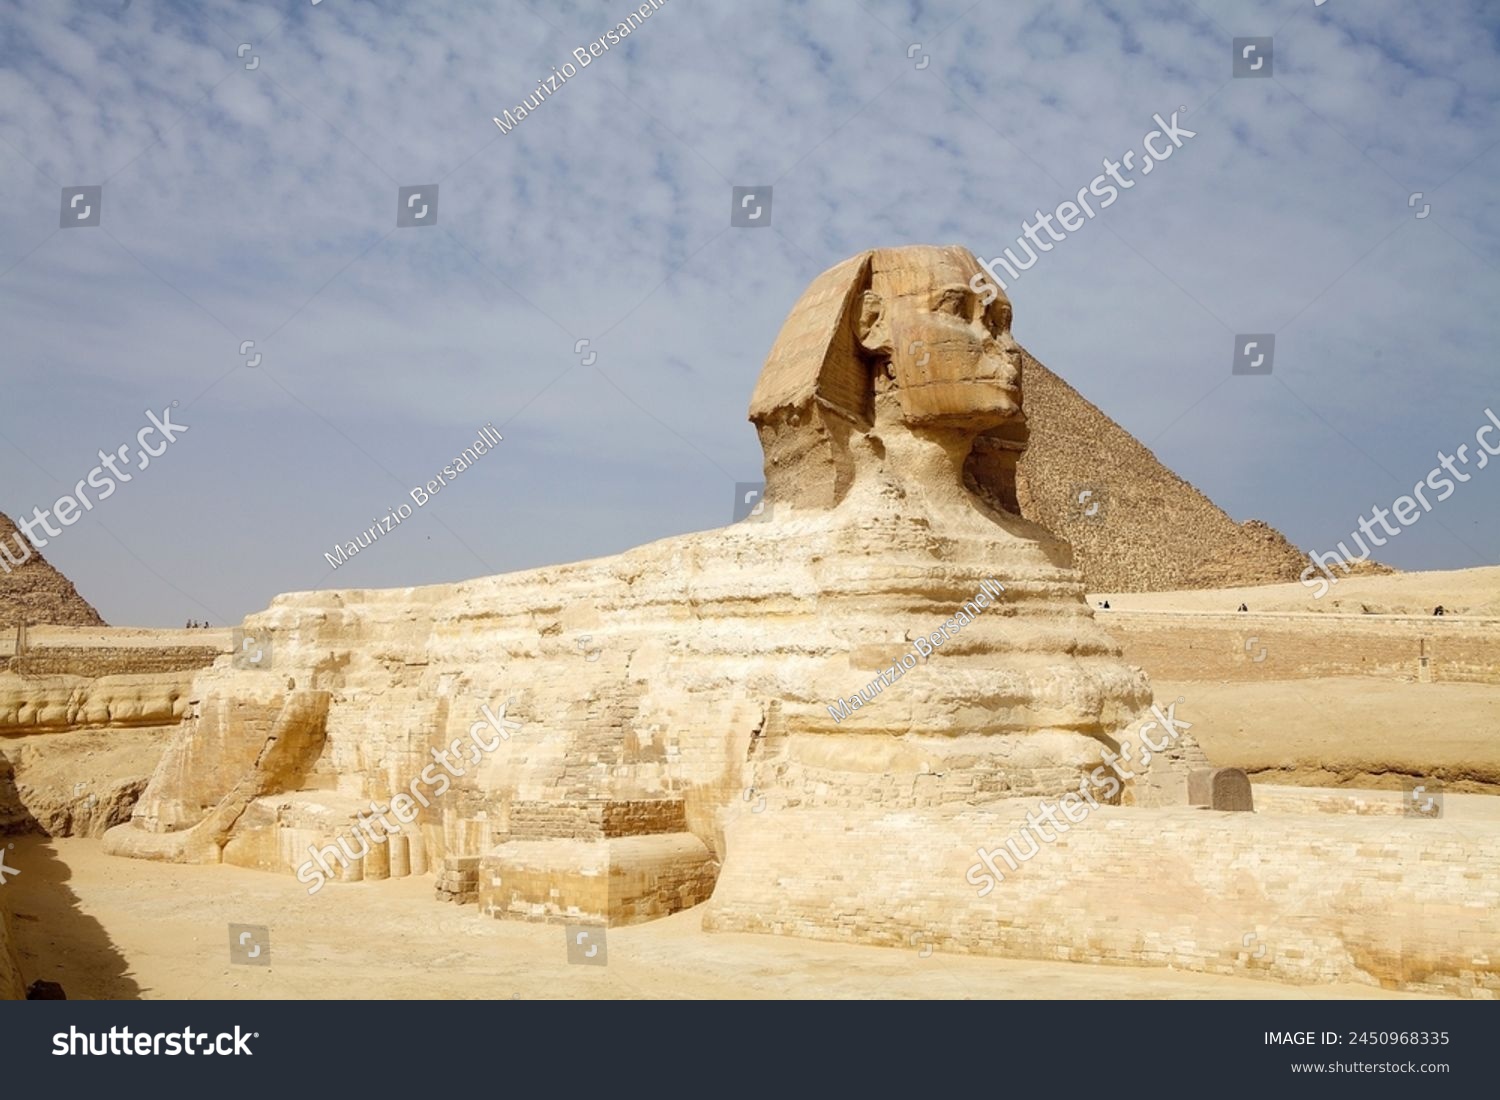 The Great Sphinx and the Great Pyramids in Giza, Egypt. They were built during the Fourth Dynasty of the Old Kingdom #2450968335